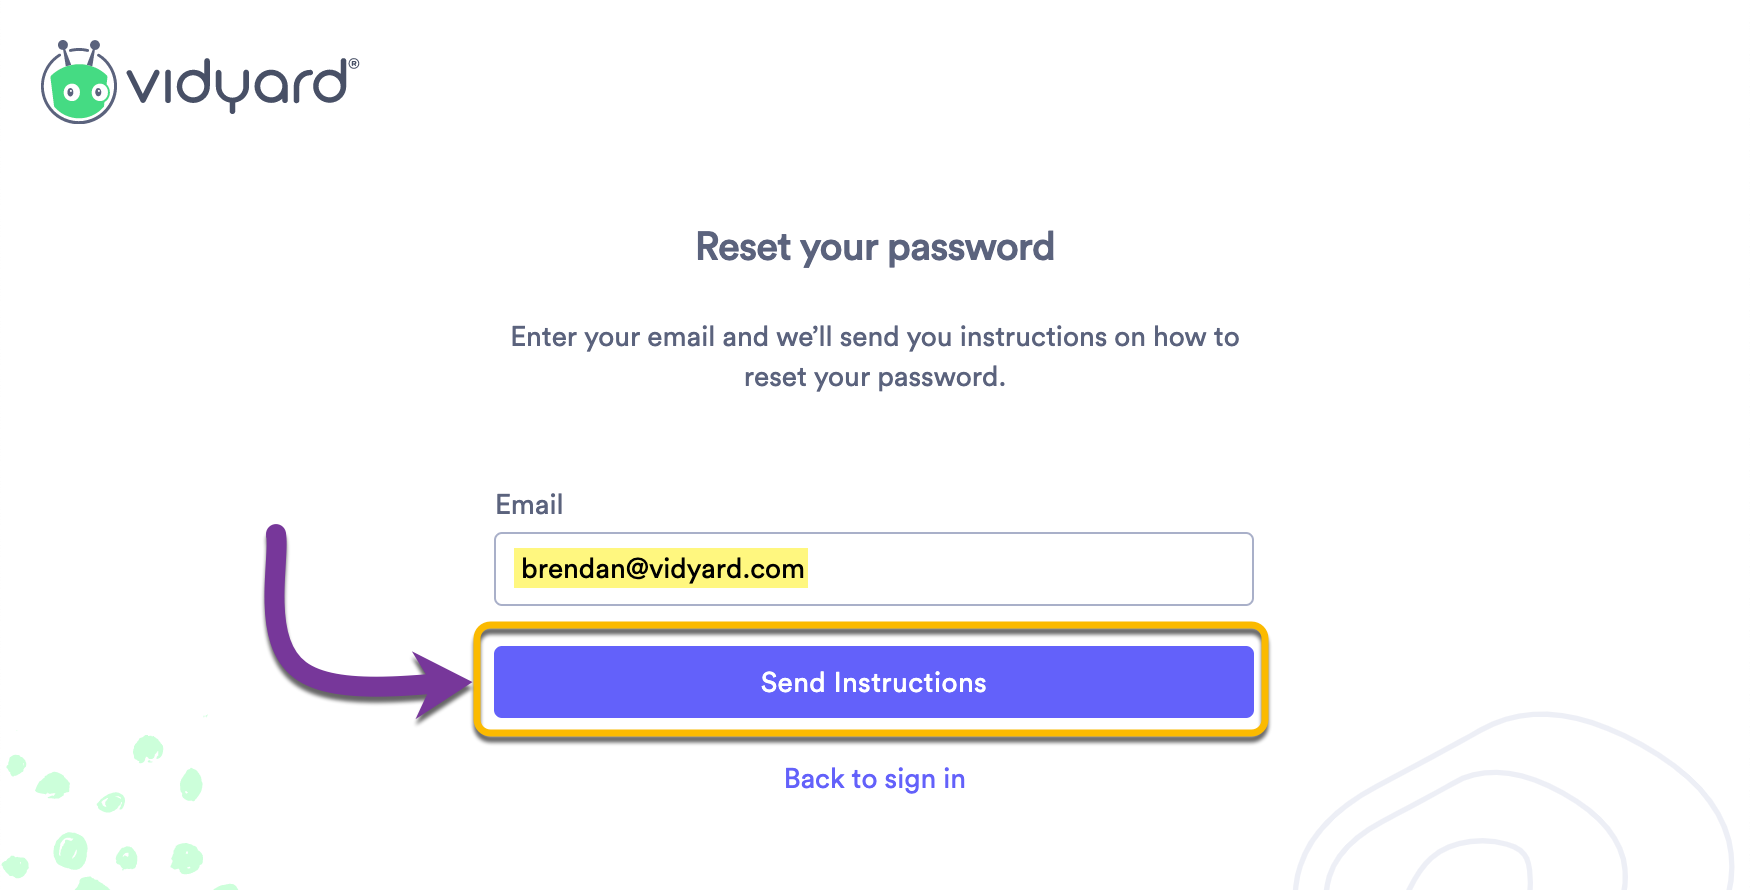 Entering your email address to receive password reset instructions